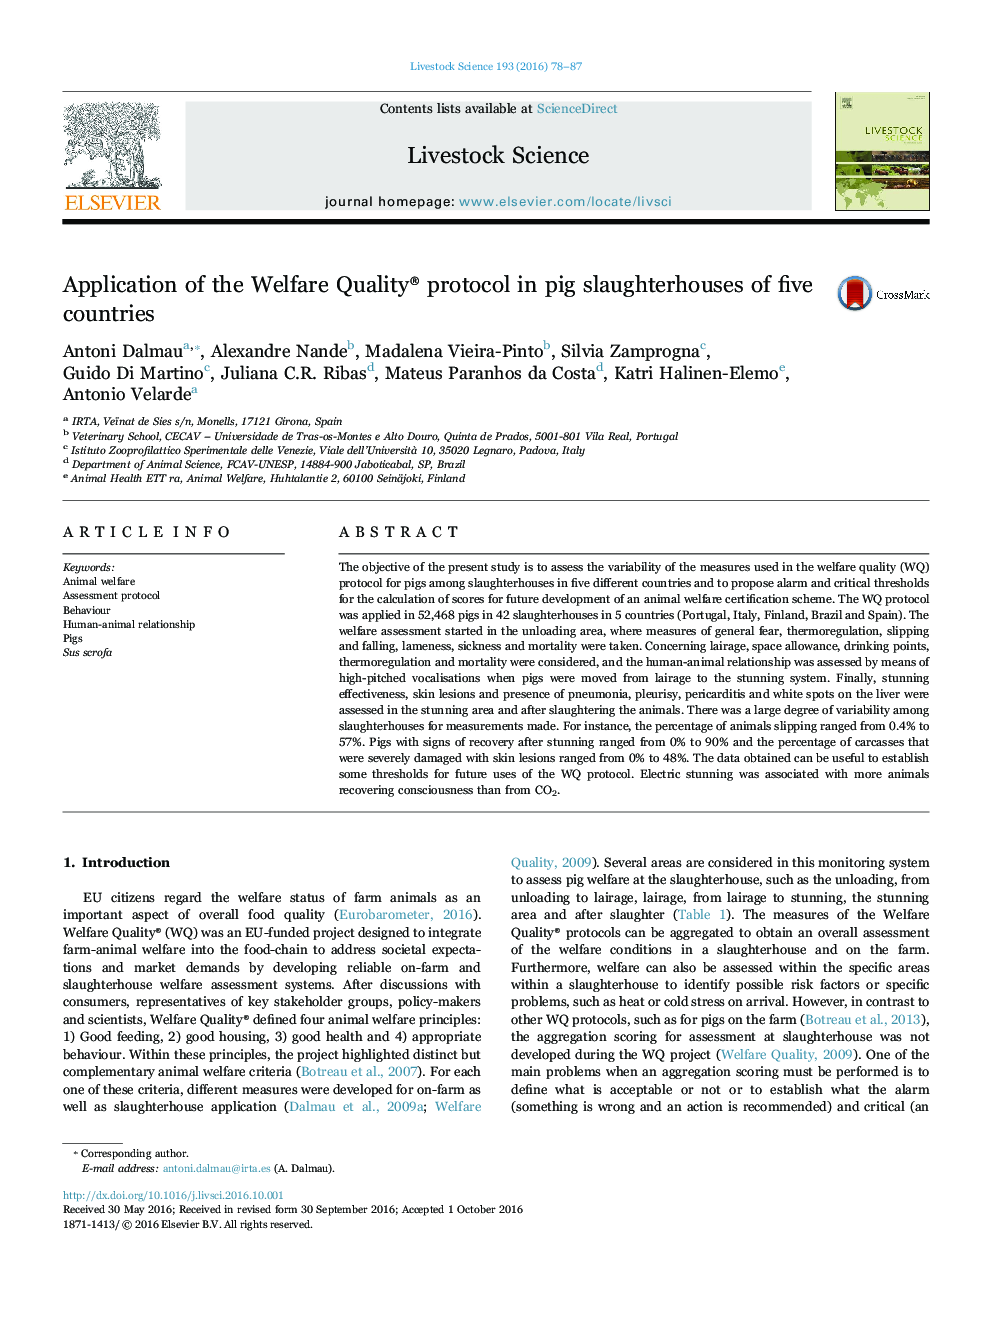 Application of the Welfare Quality® protocol in pig slaughterhouses of five countries